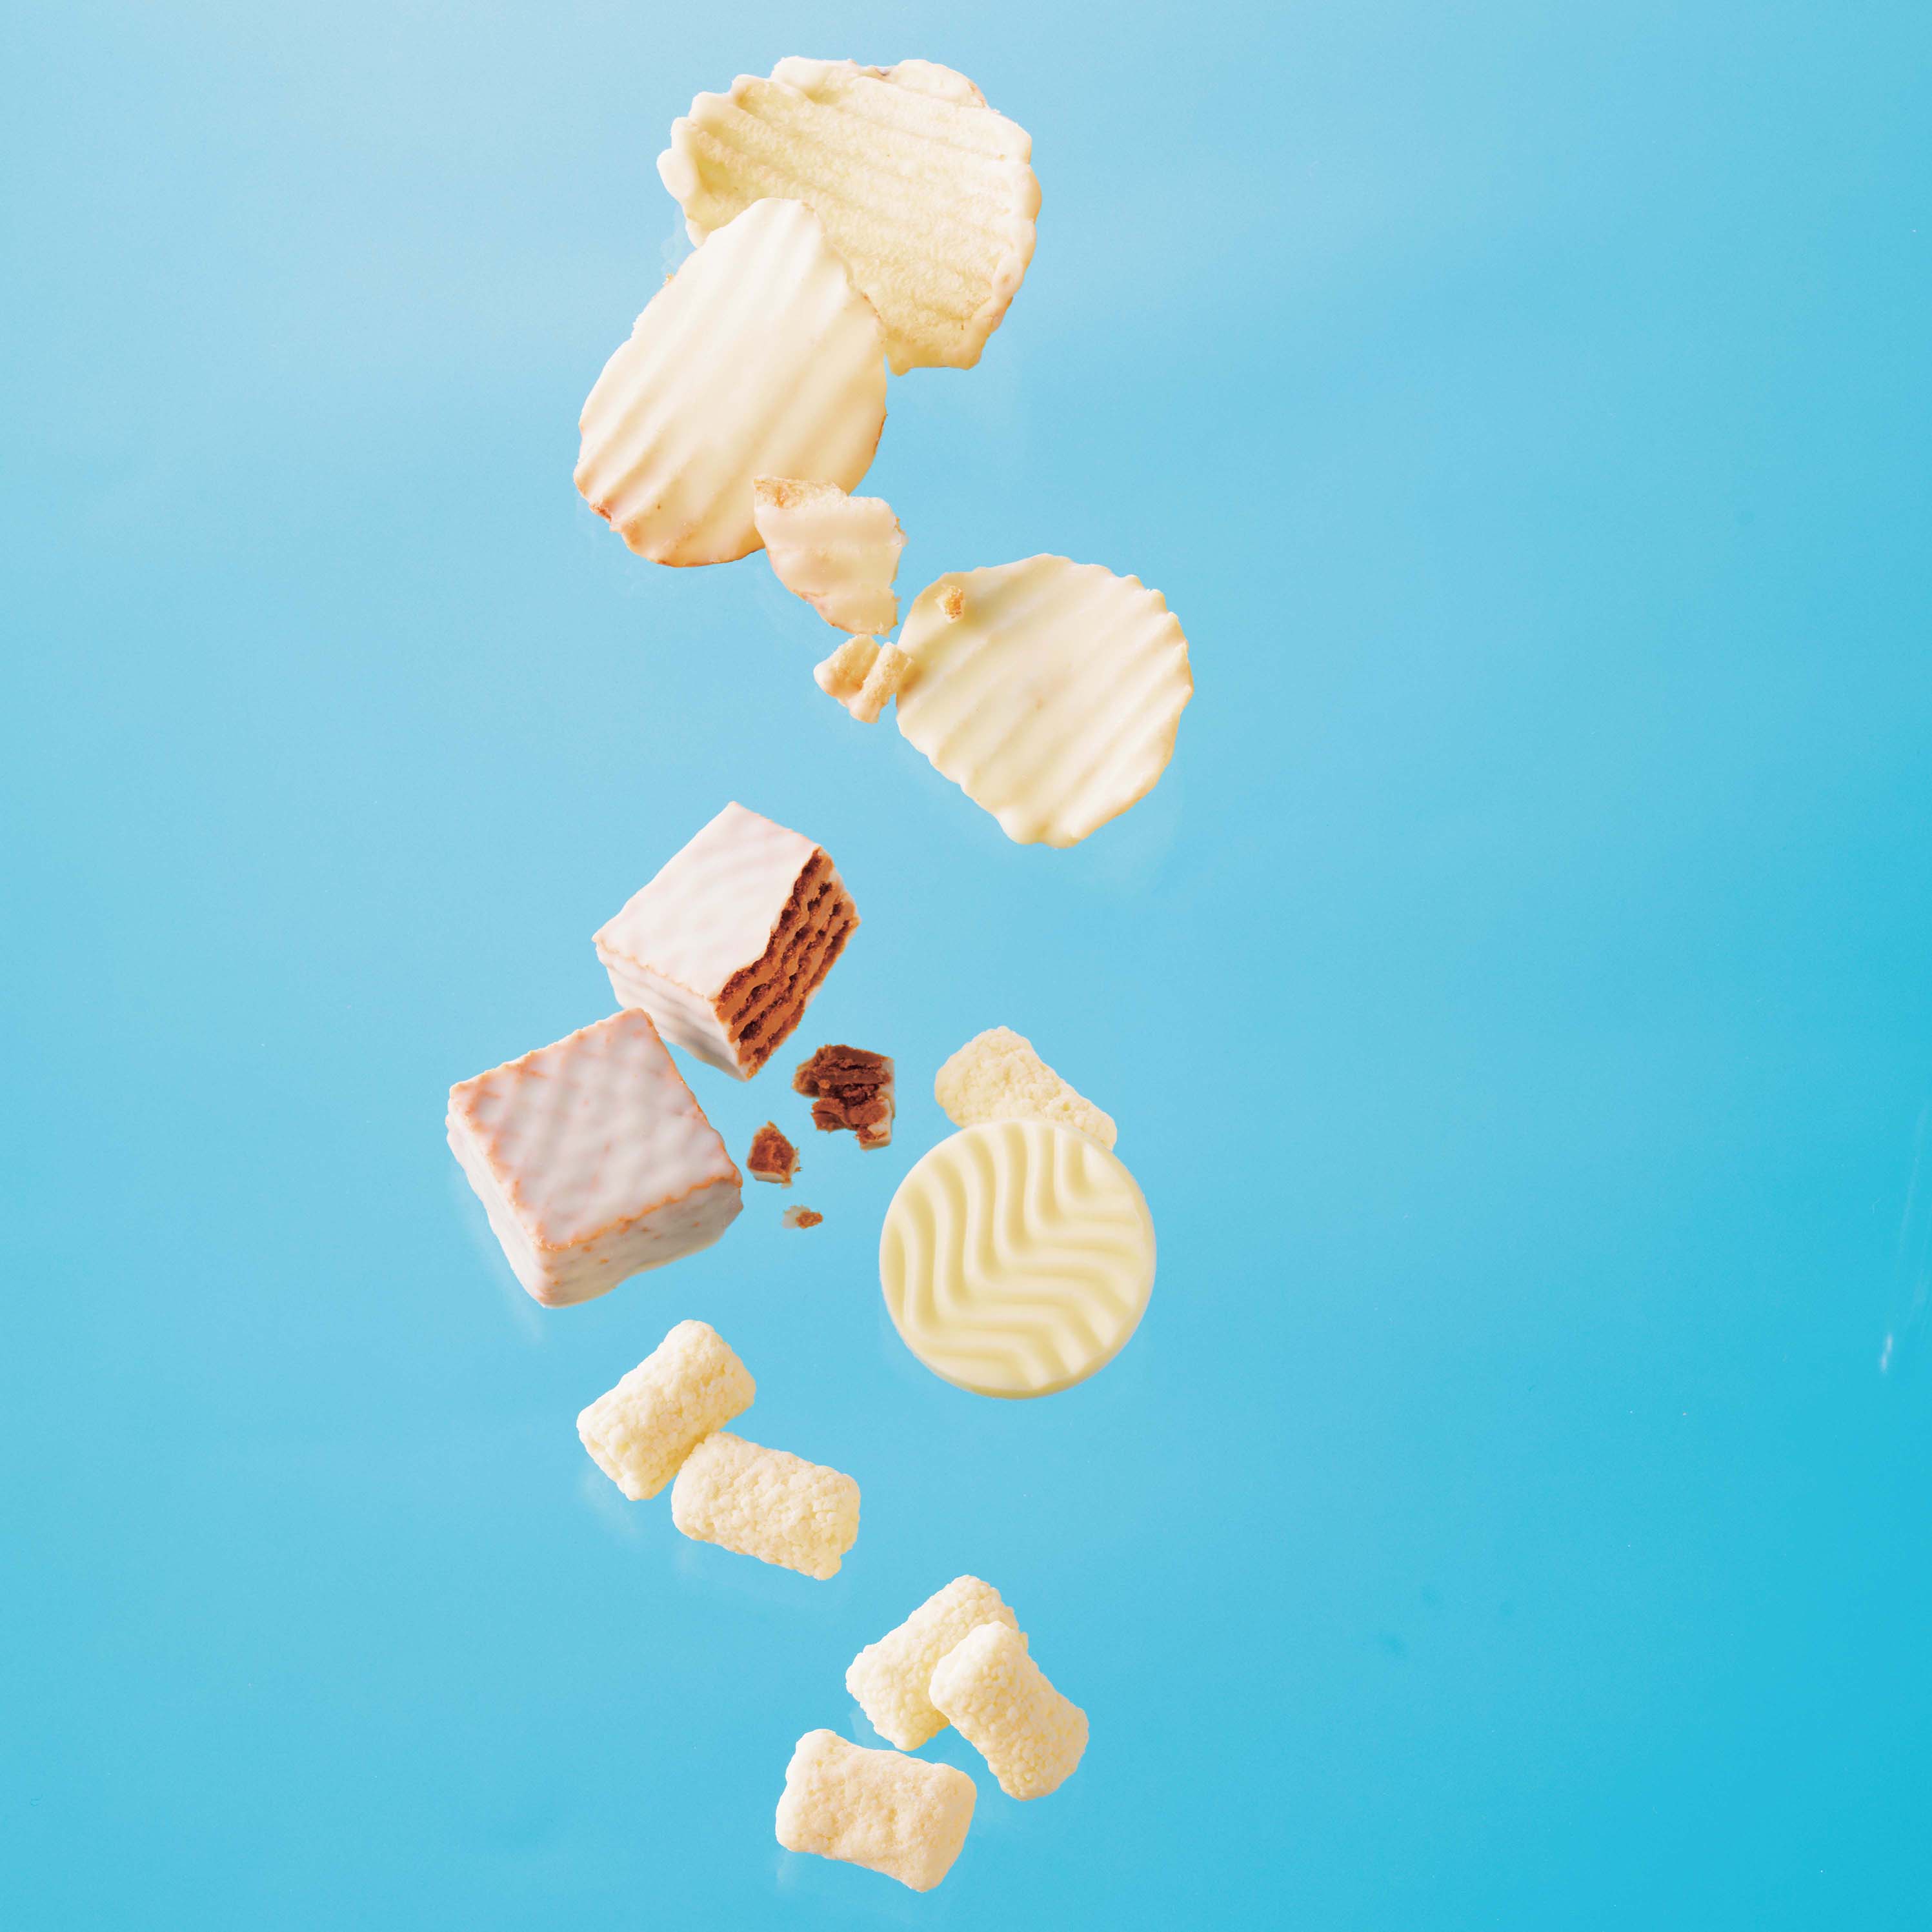 Image shows a variety of white chocolates with a blue background.